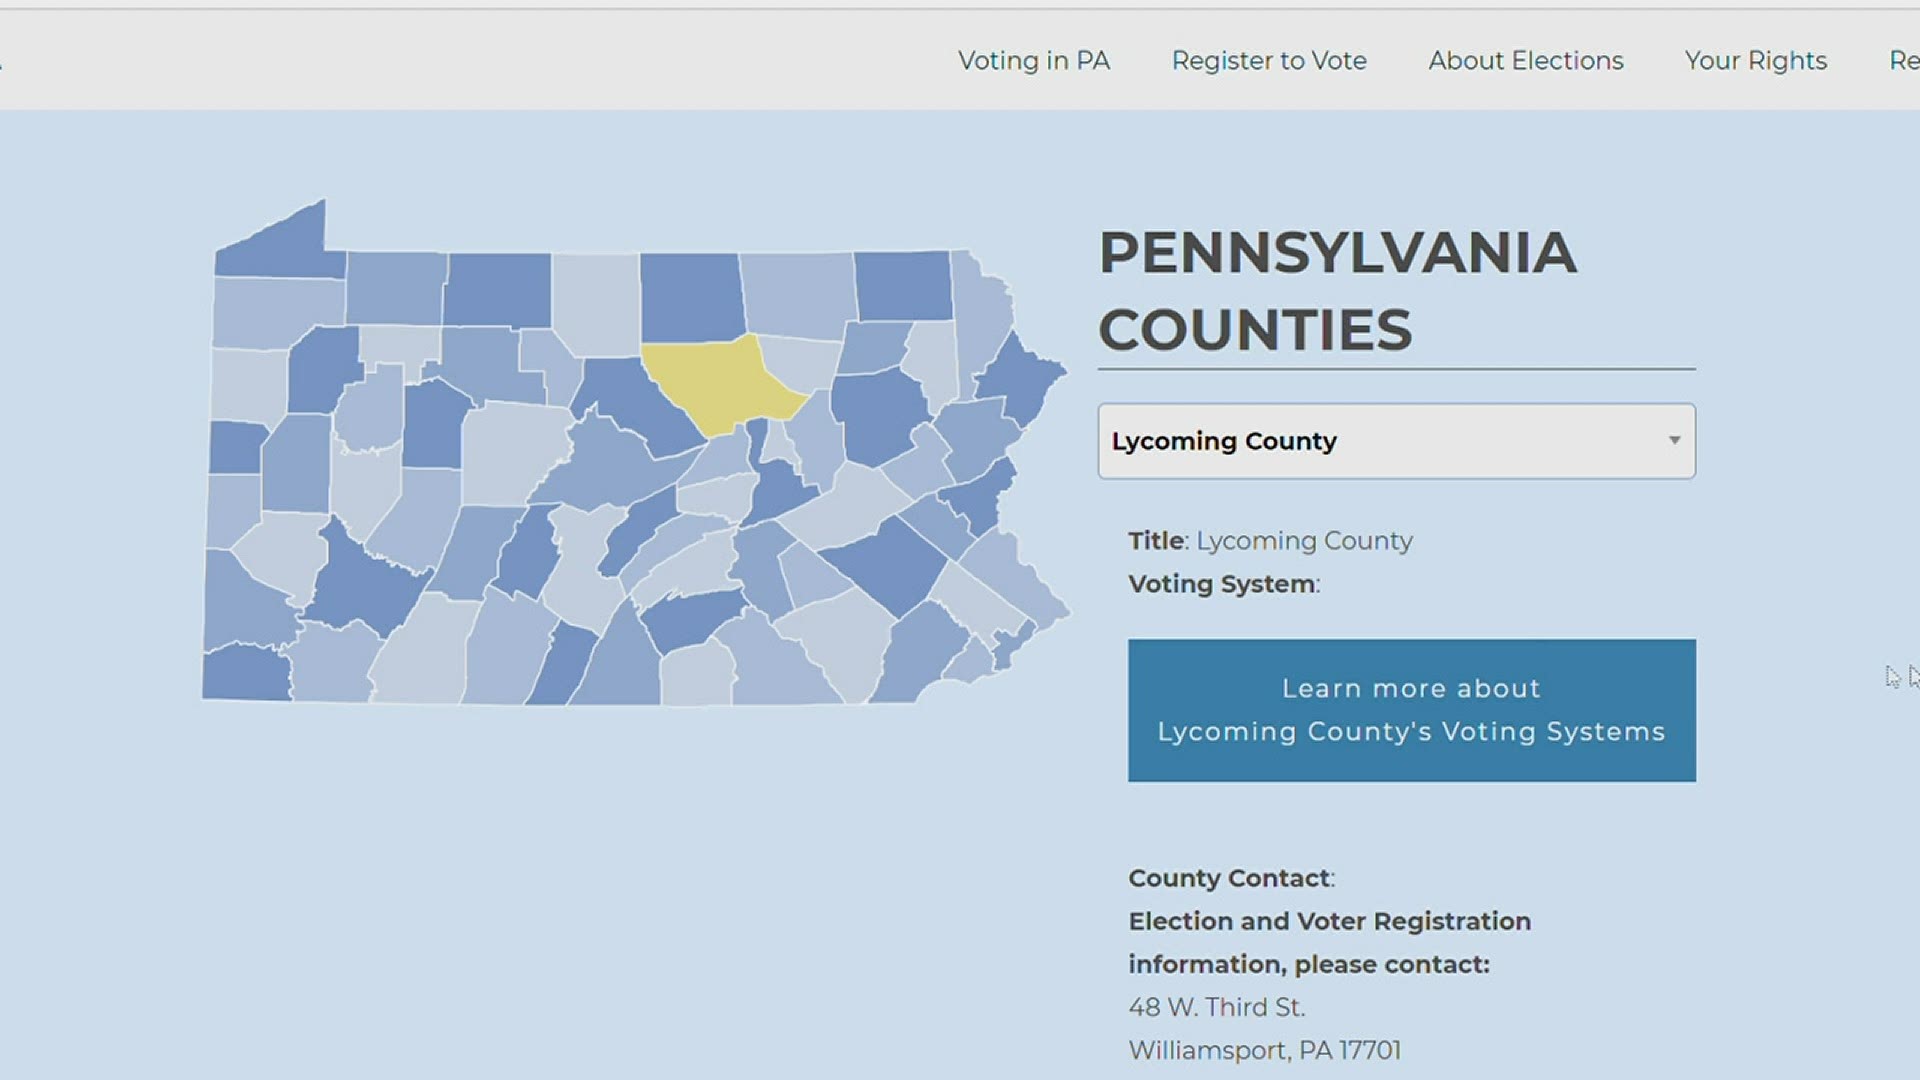 There are 67 new websites -- one for each county. They're designed to help voters learn about their county's voting system and how to use it.